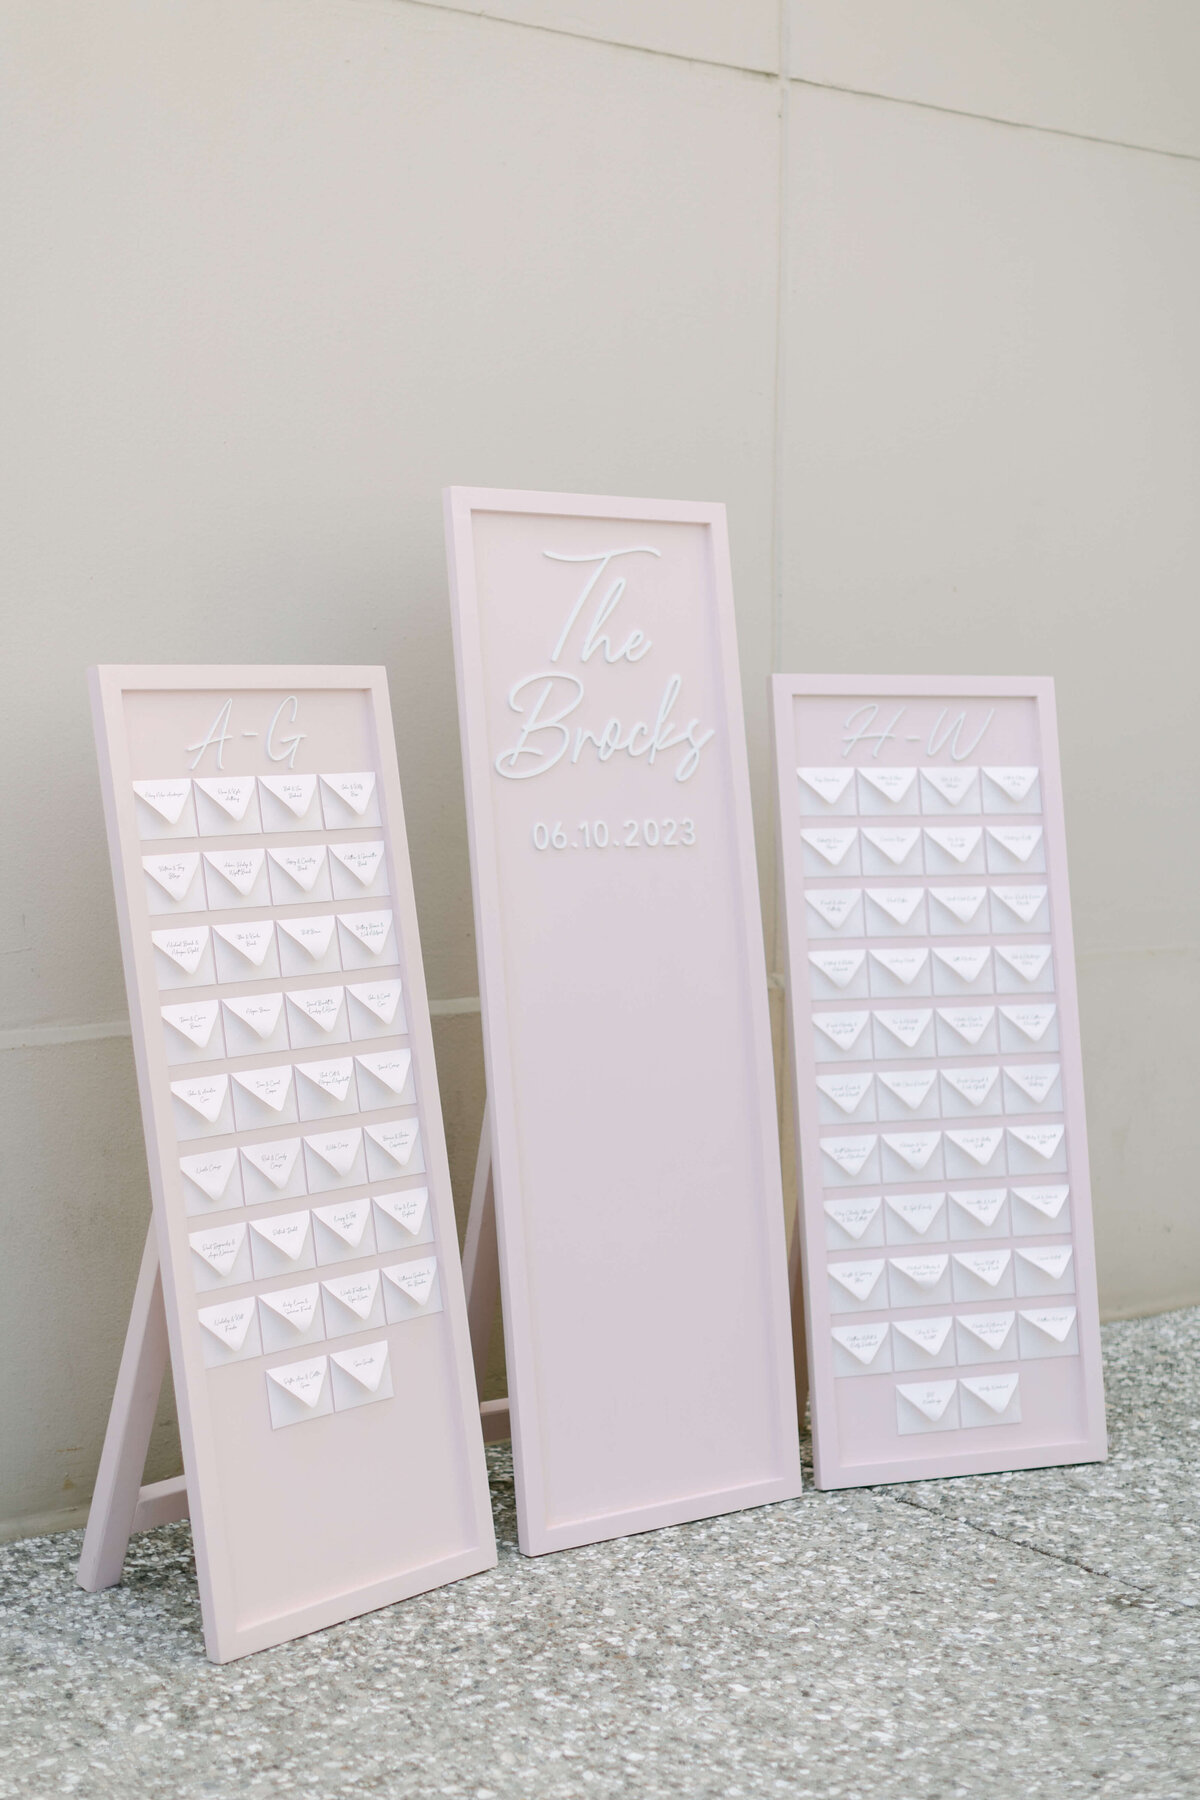 Guest cards sitting on a pink wall.